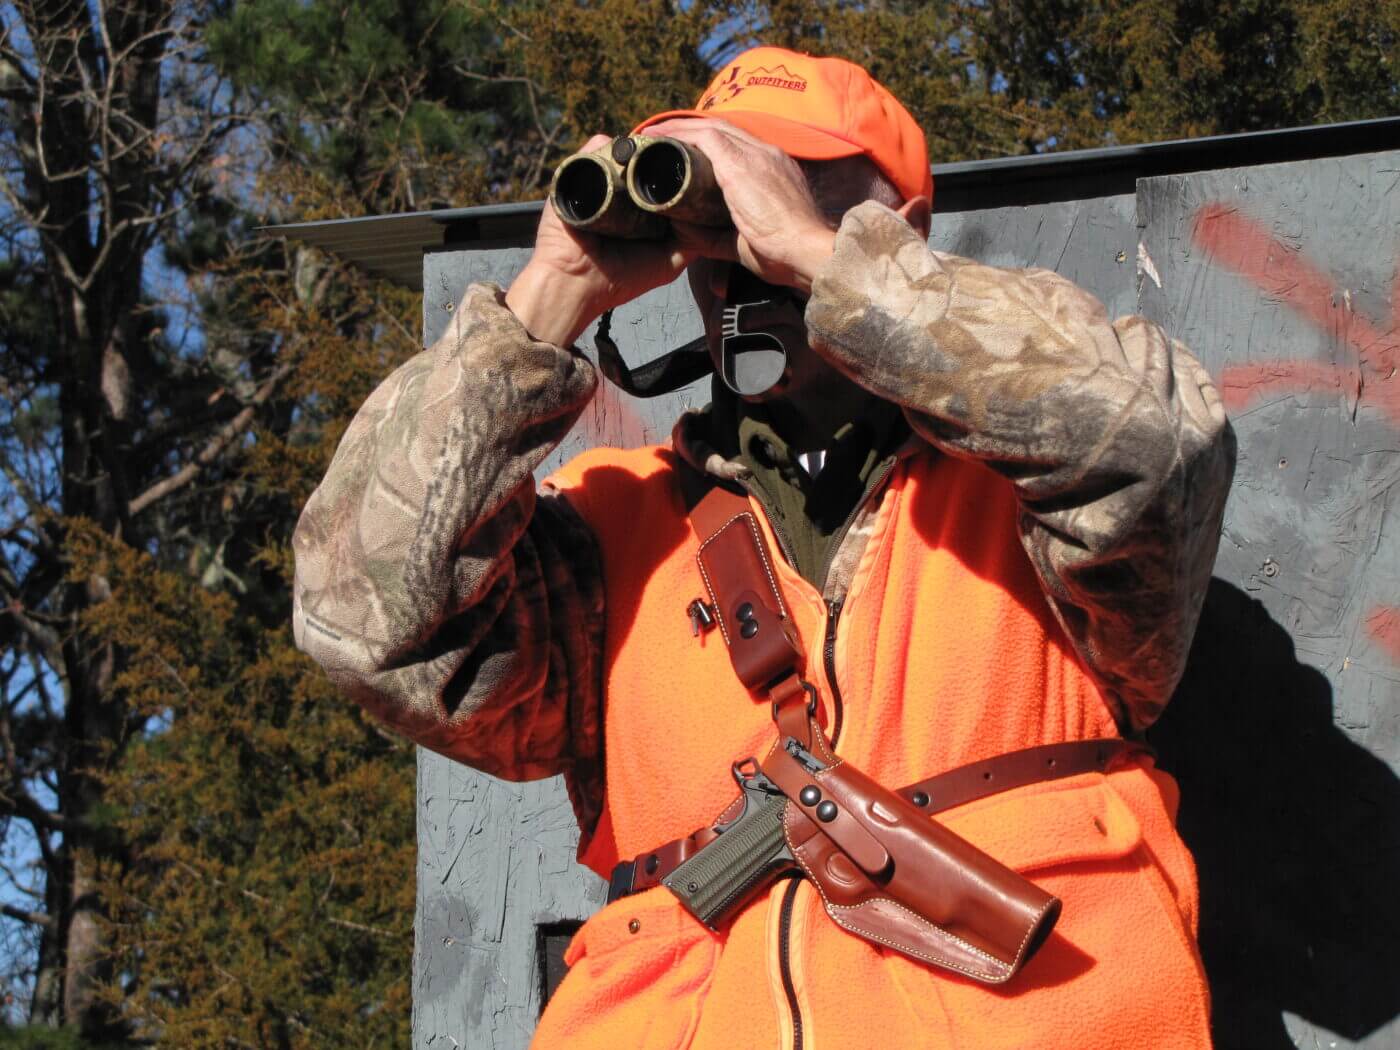 Hunter using binoculars and a chest holster with pistol